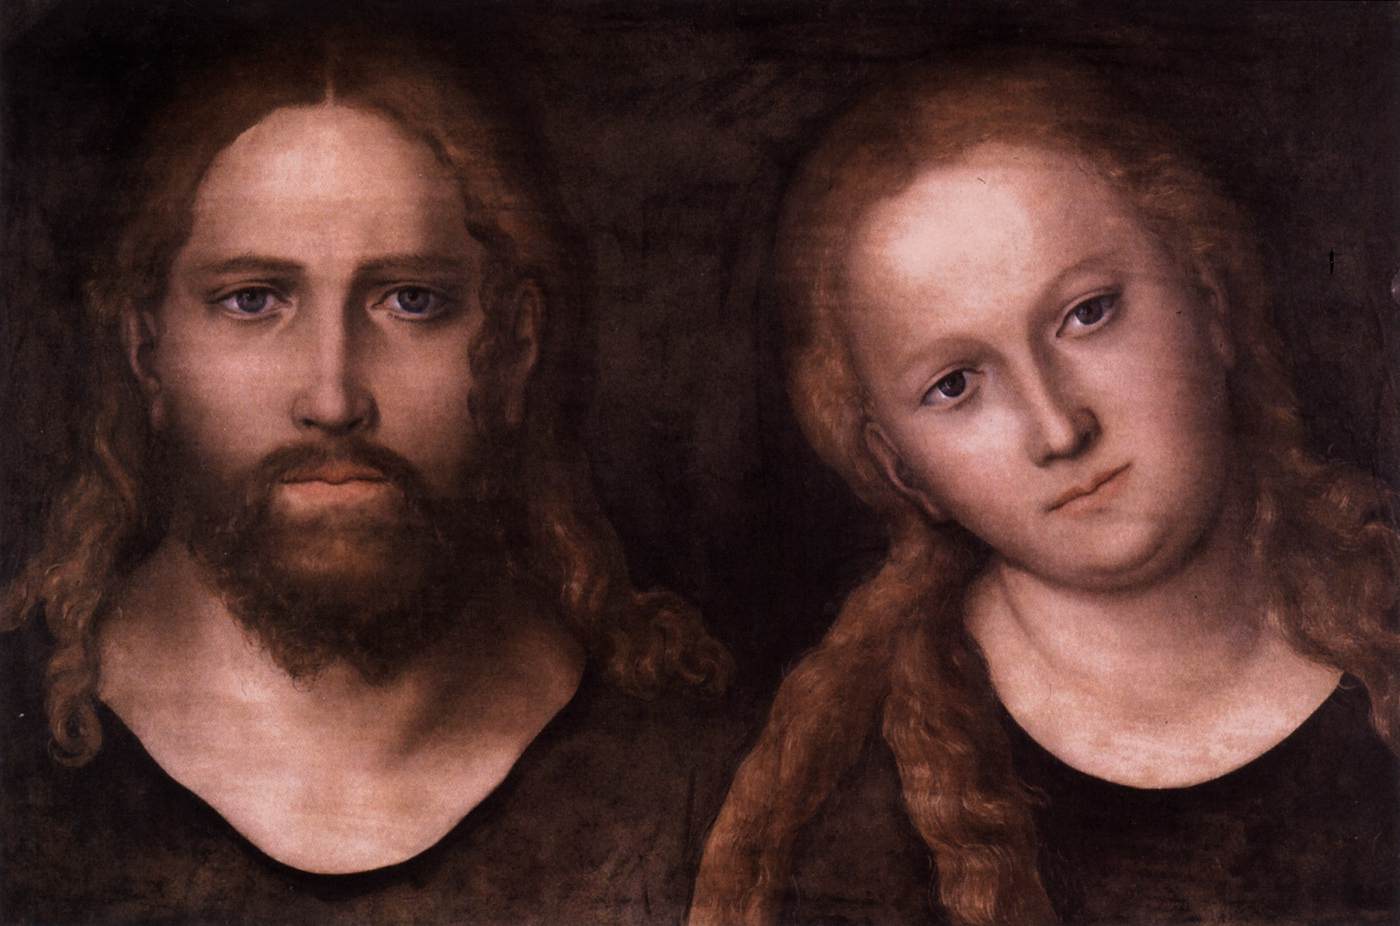 Christ and The Virgin Mary (Or Mary Magdalene)